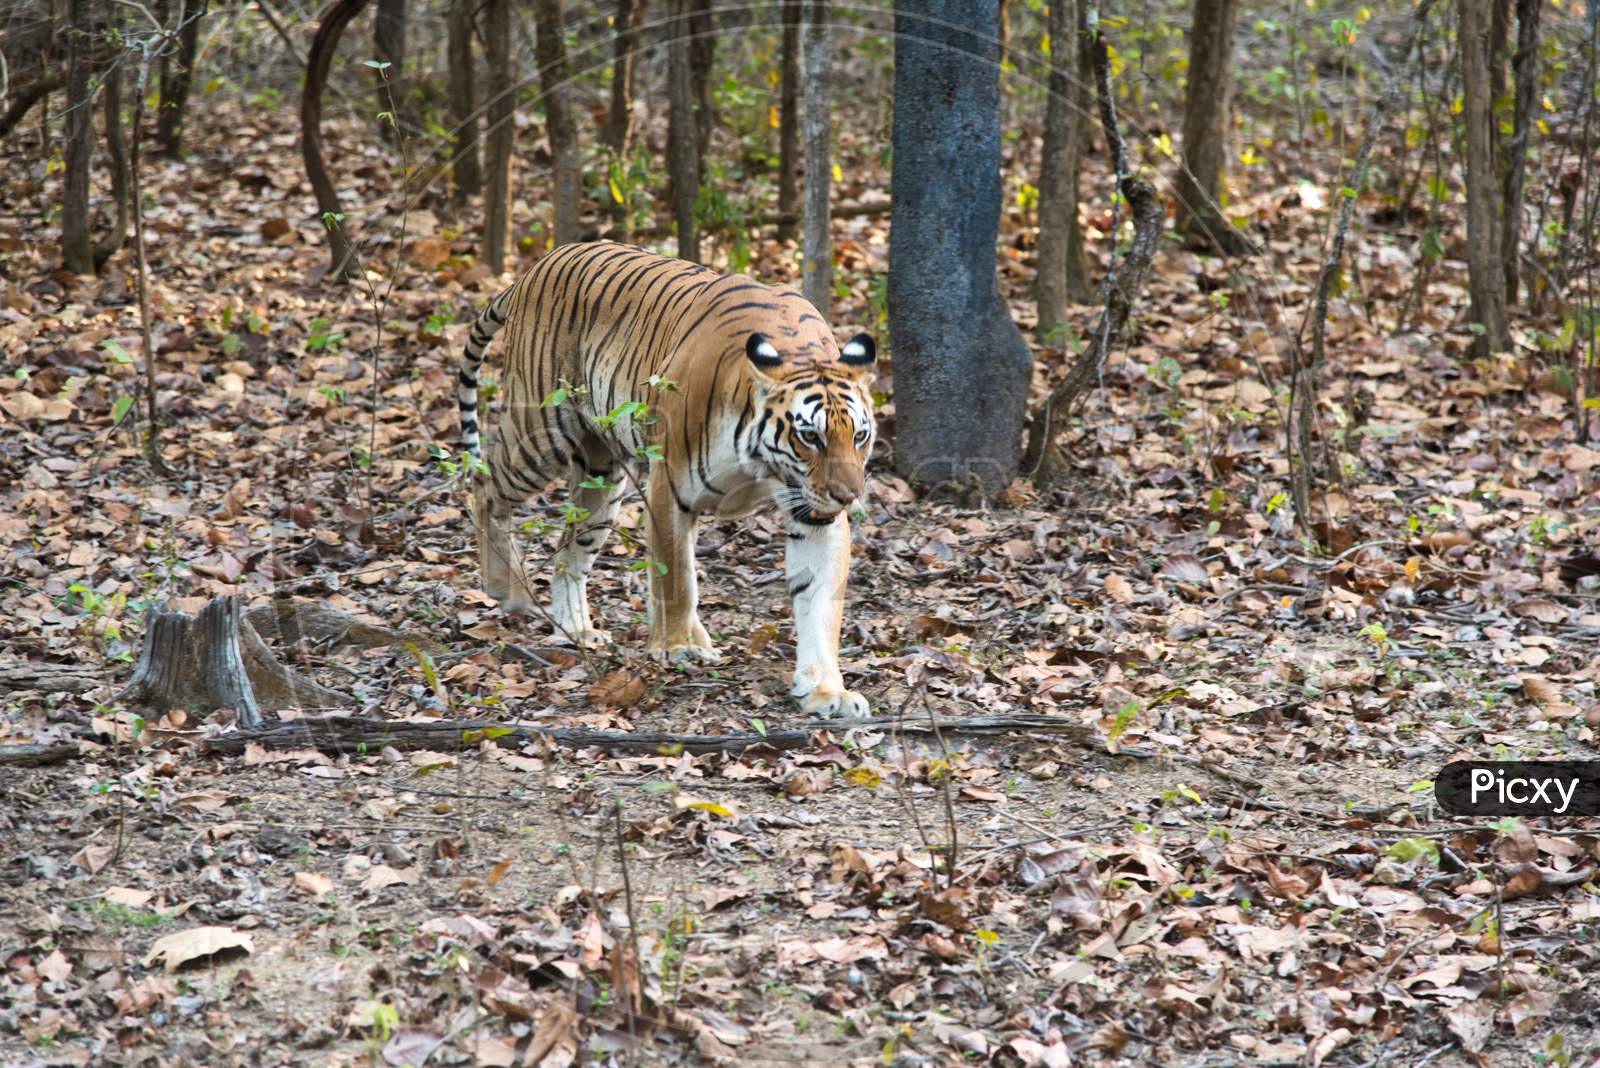 A female Royal Bengal tiger camouflaged in the foliage